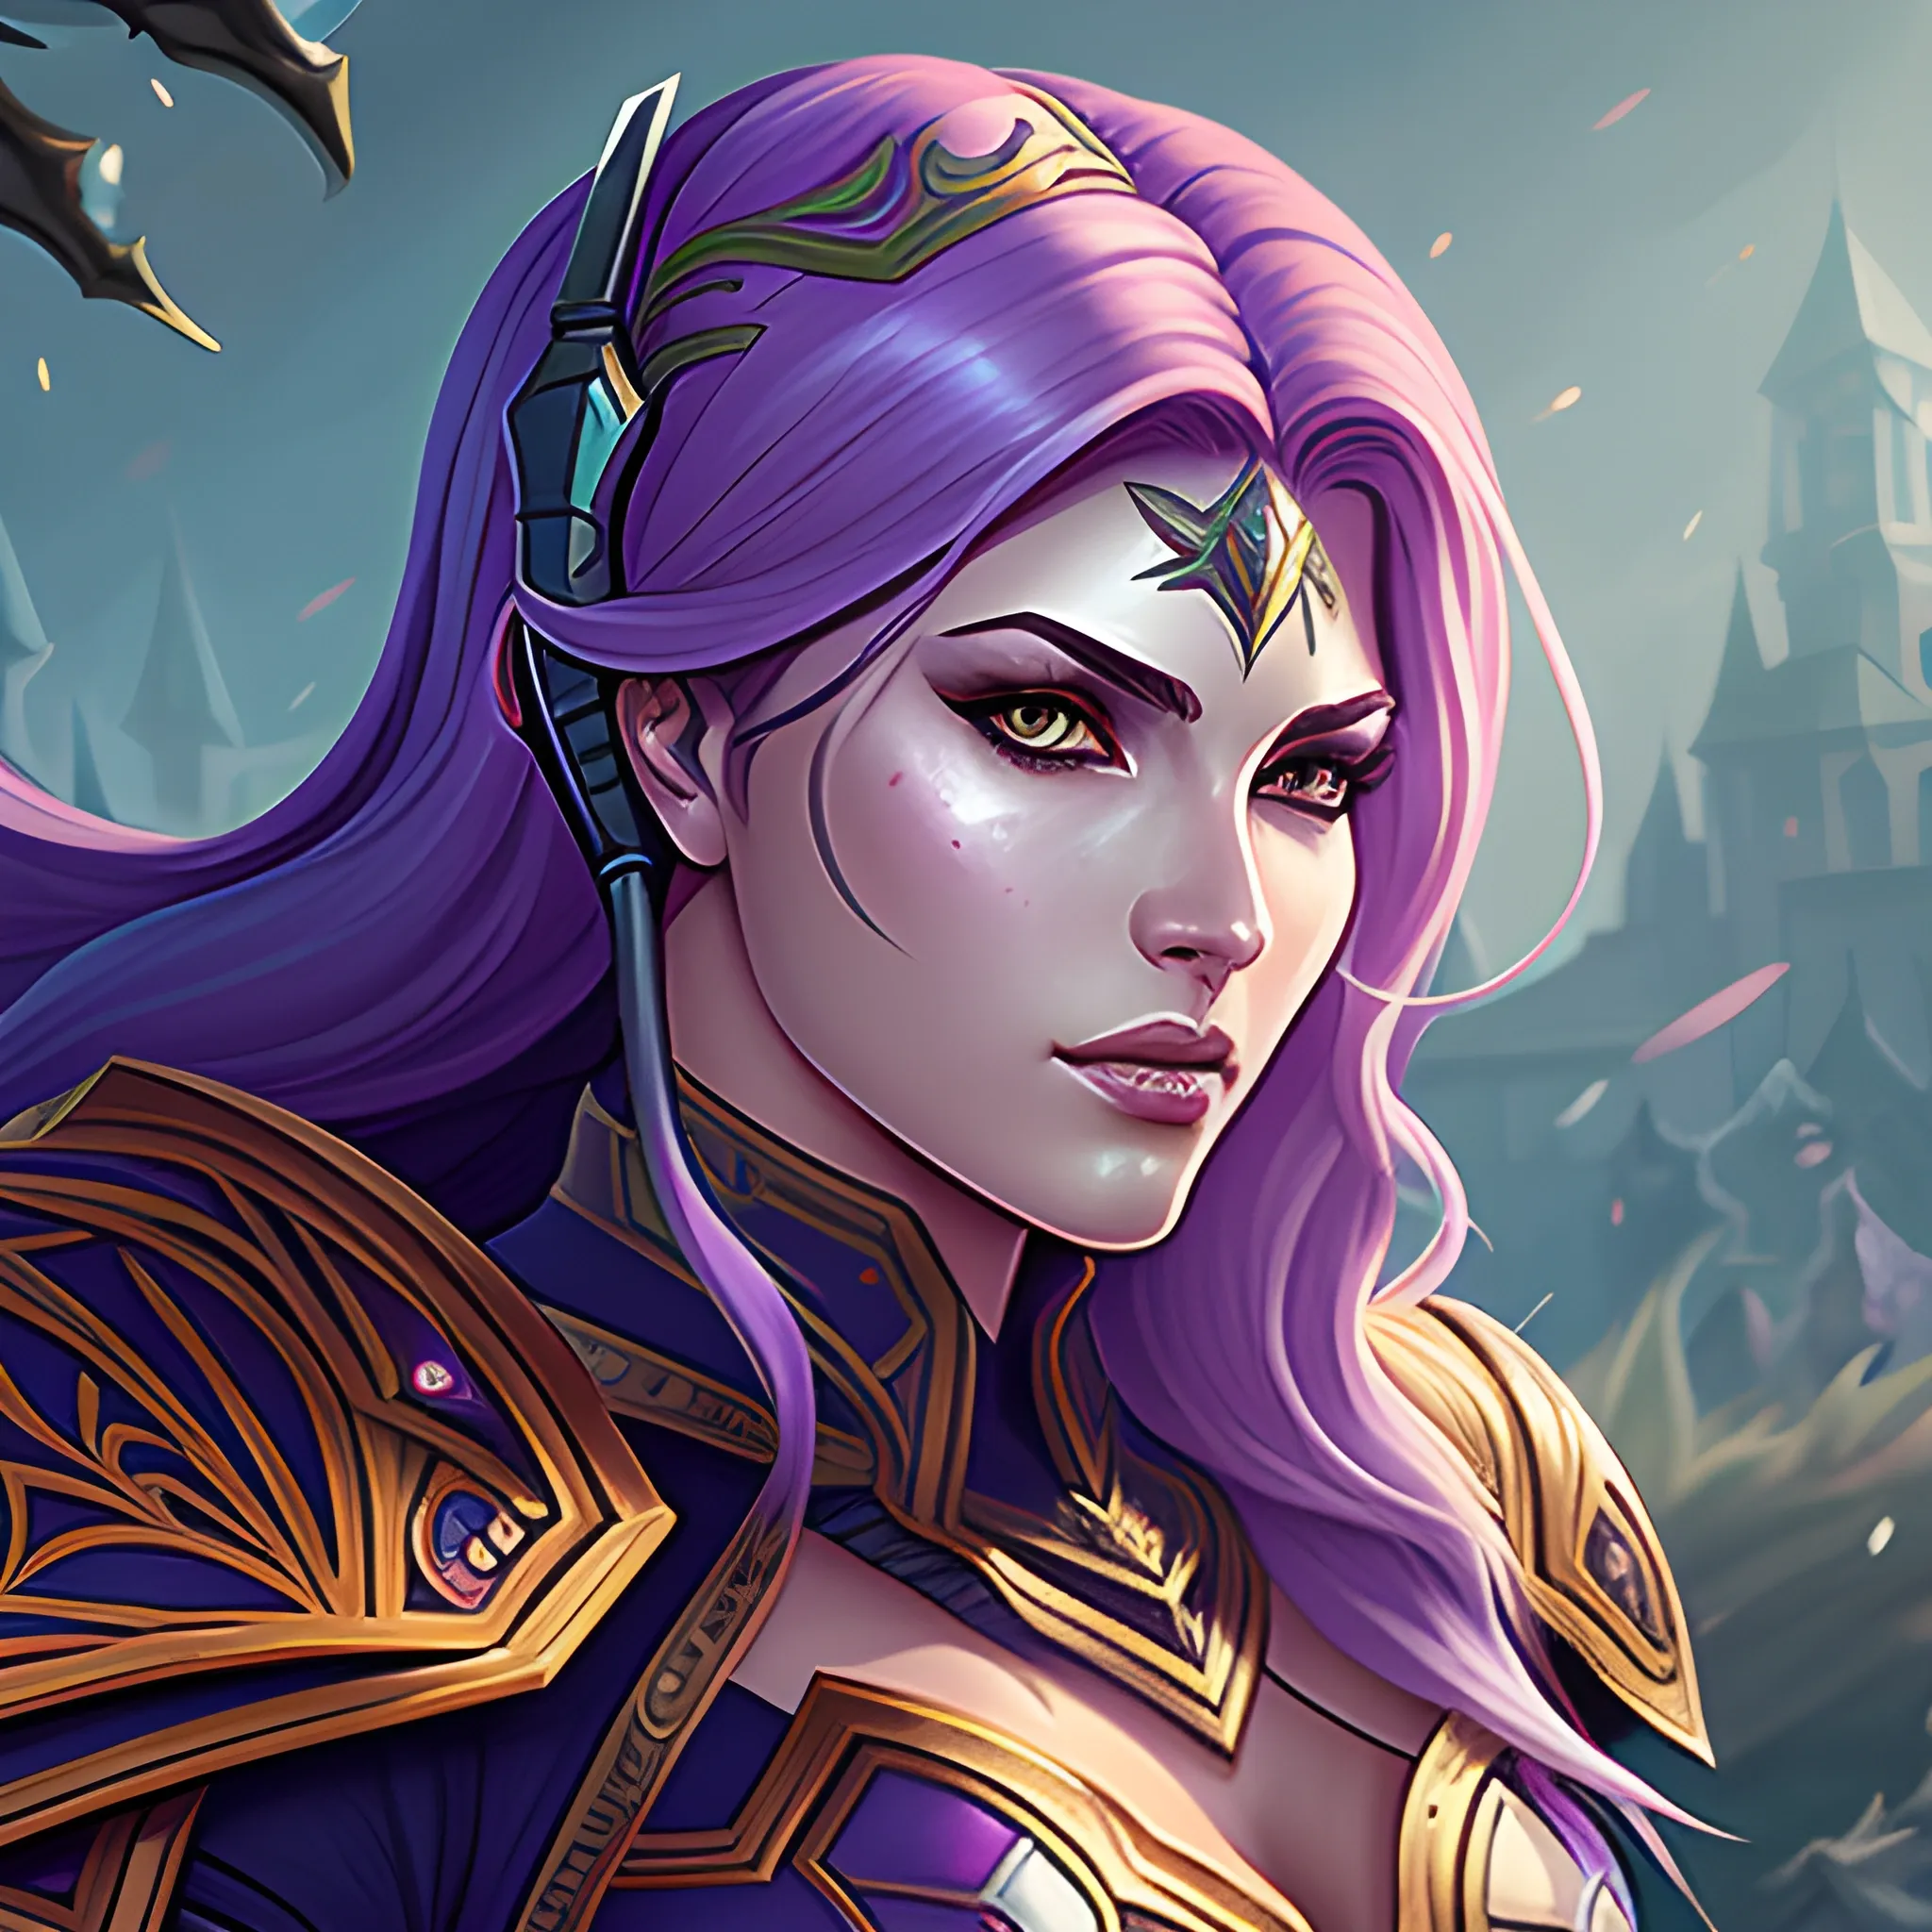 A digitally painted portrait, depicting a powerful new female character of the League of Legends game, with intricate armor and magical elements, Cartoon